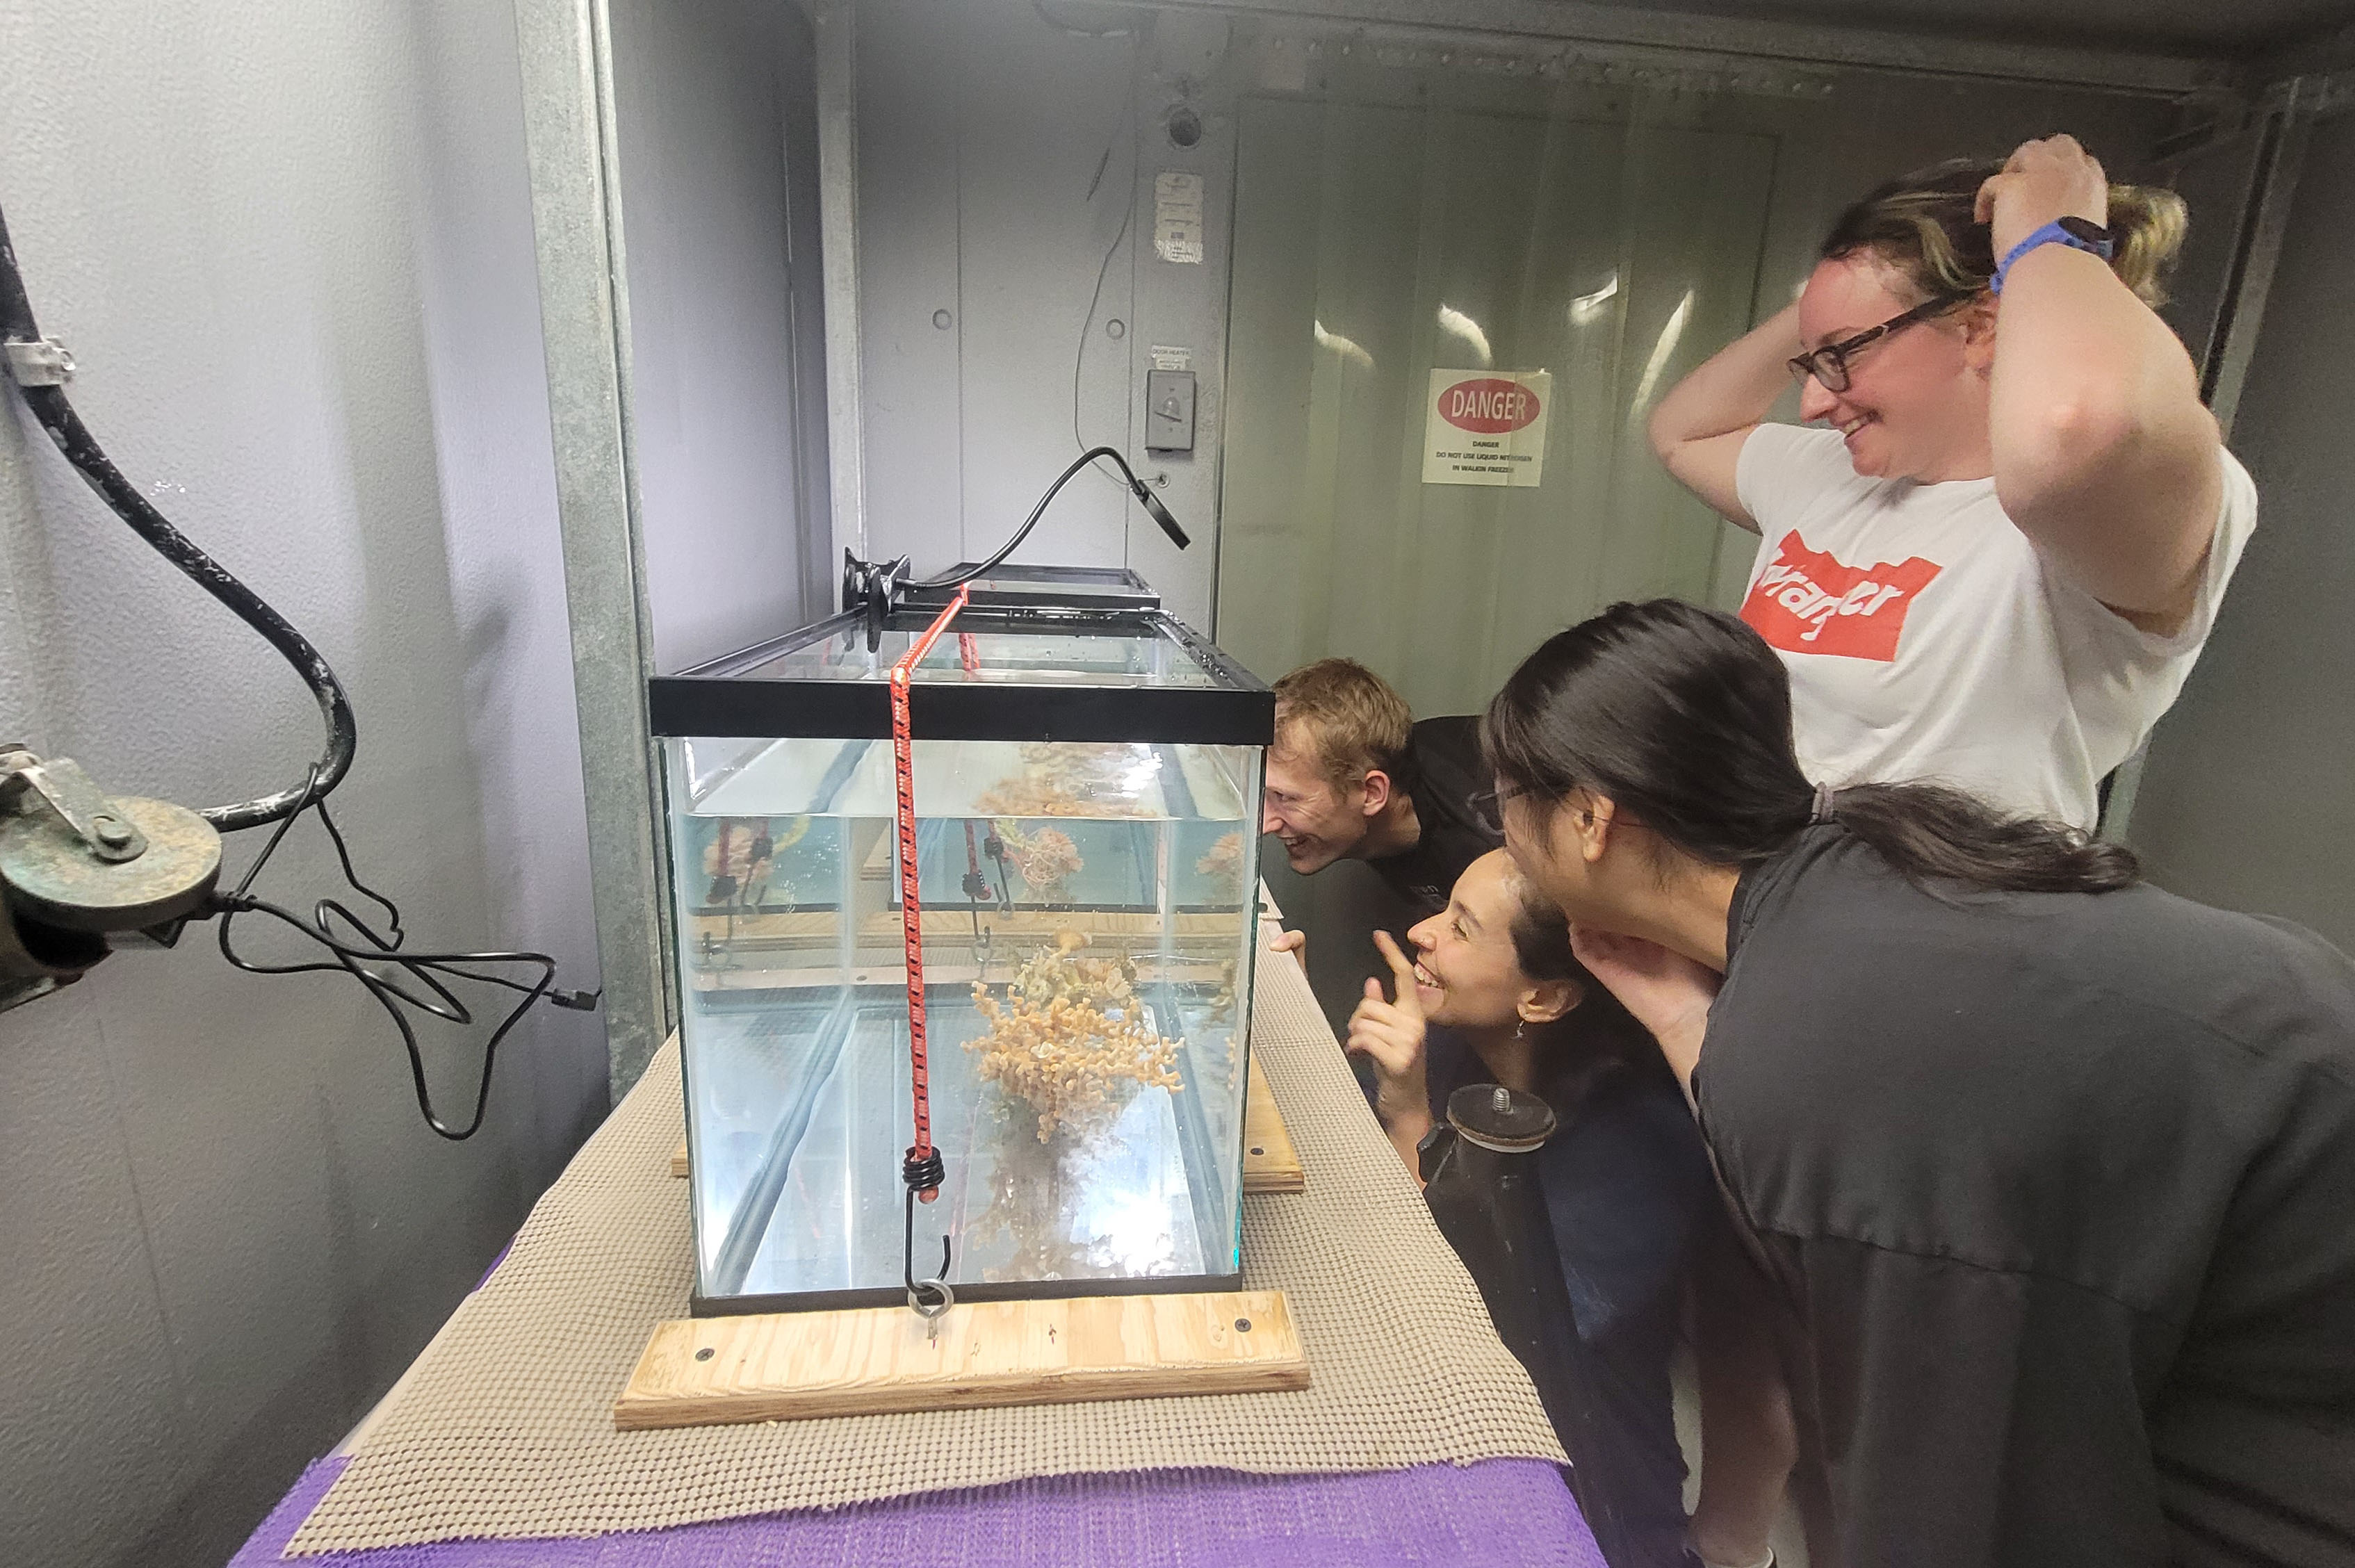 Bristol scientists observing collected samples in the onboard cold-room “aquarium” to simulate the cold seawater conditions found on the deep seafloor